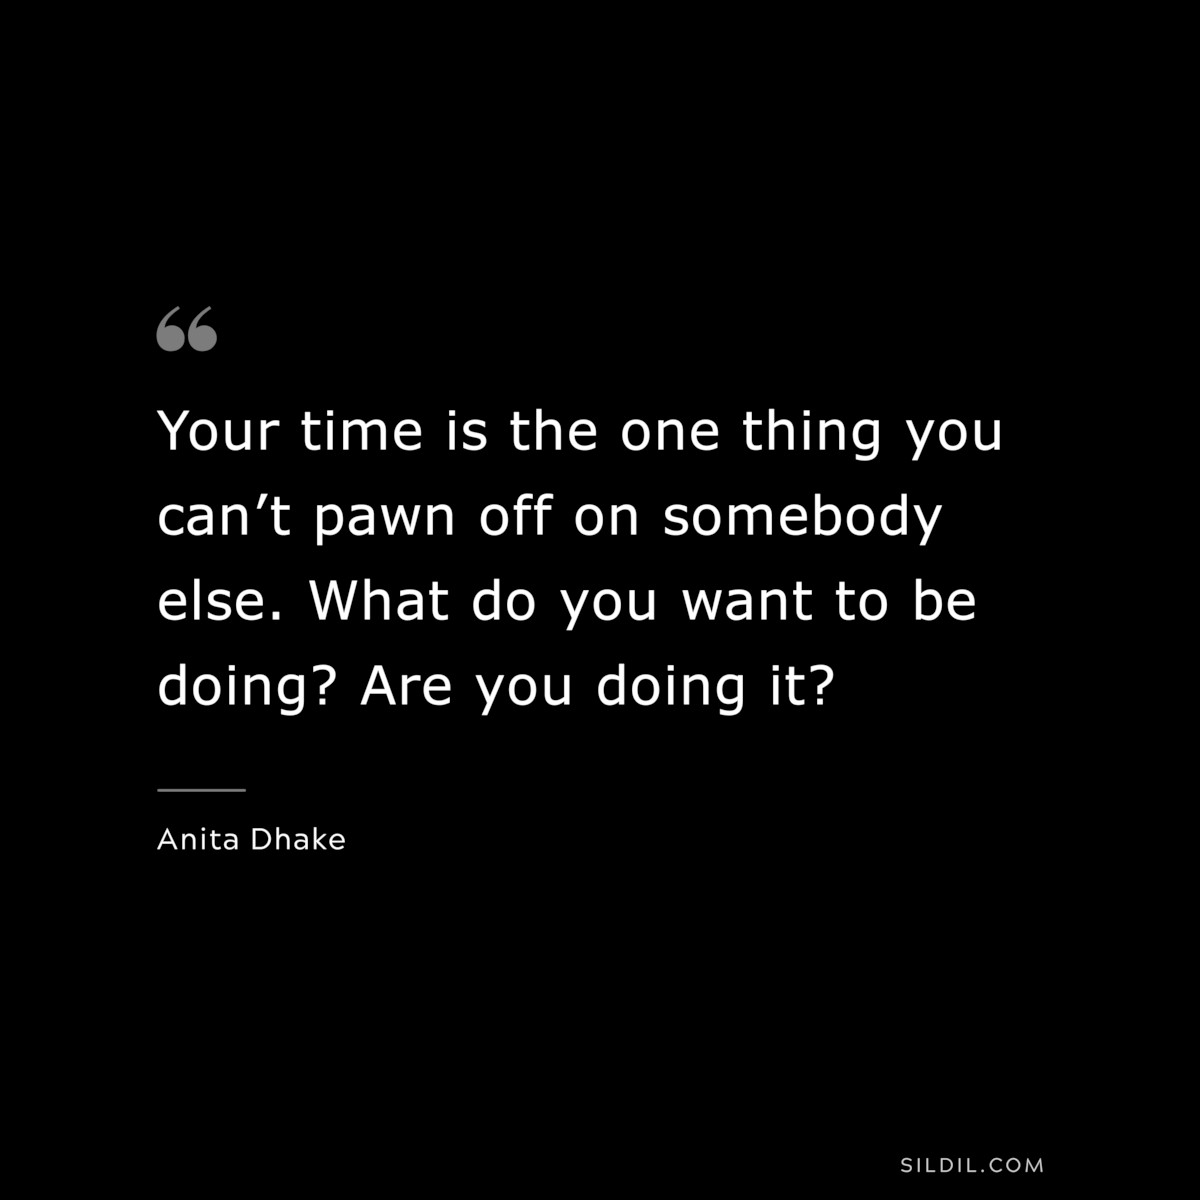 Your time is the one thing you can’t pawn off on somebody else. What do you want to be doing? Are you doing it? ― Anita Dhake